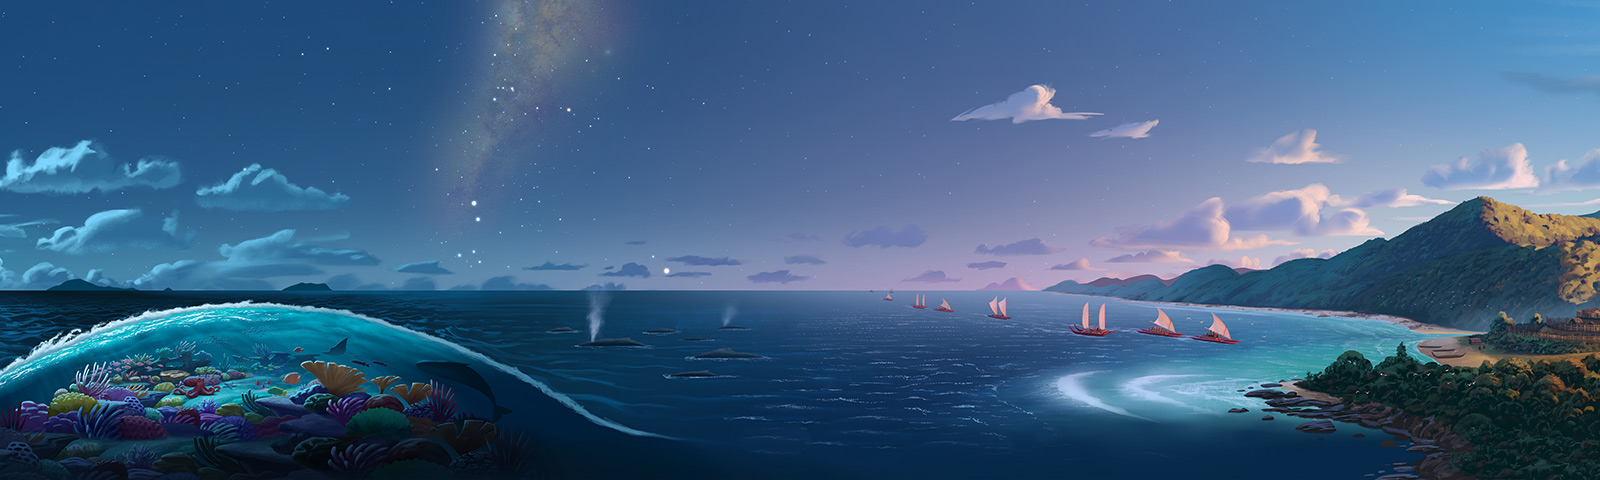 Colour artwork of the Pacific Ocean, showing the stars, clouds, an underwater scene, and a fleet of waka sailing towards the coastline.